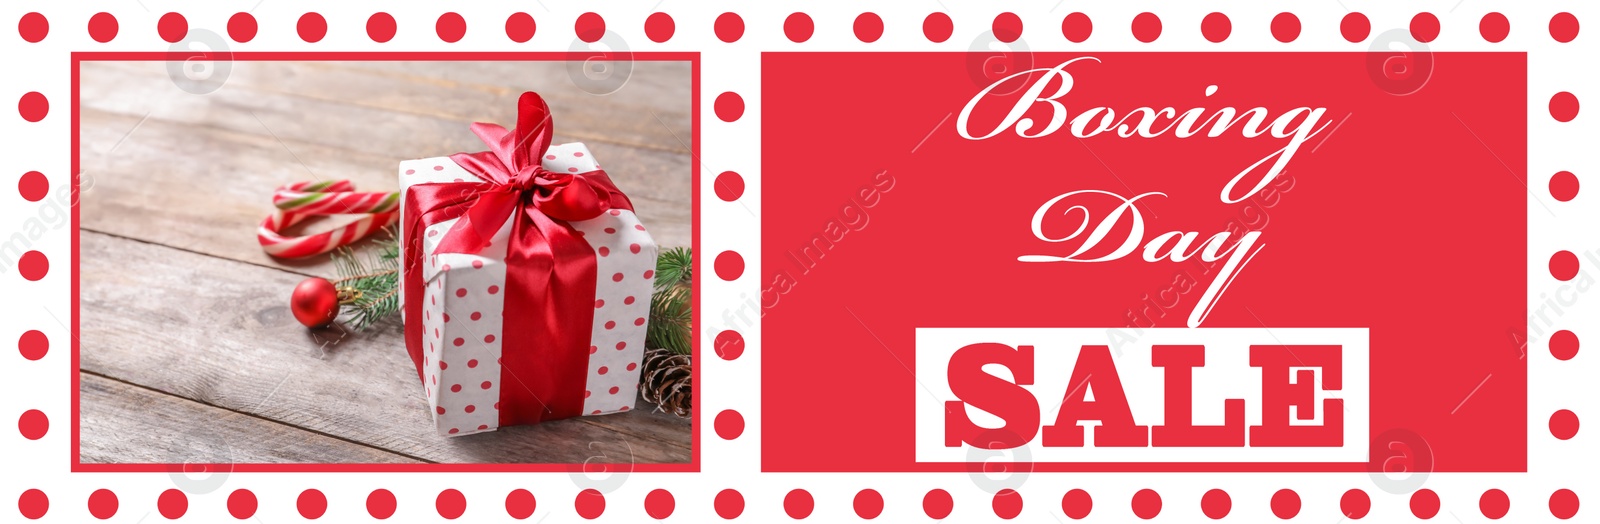 Image of Boxing Day Sale banner design. Gift on wooden table and text